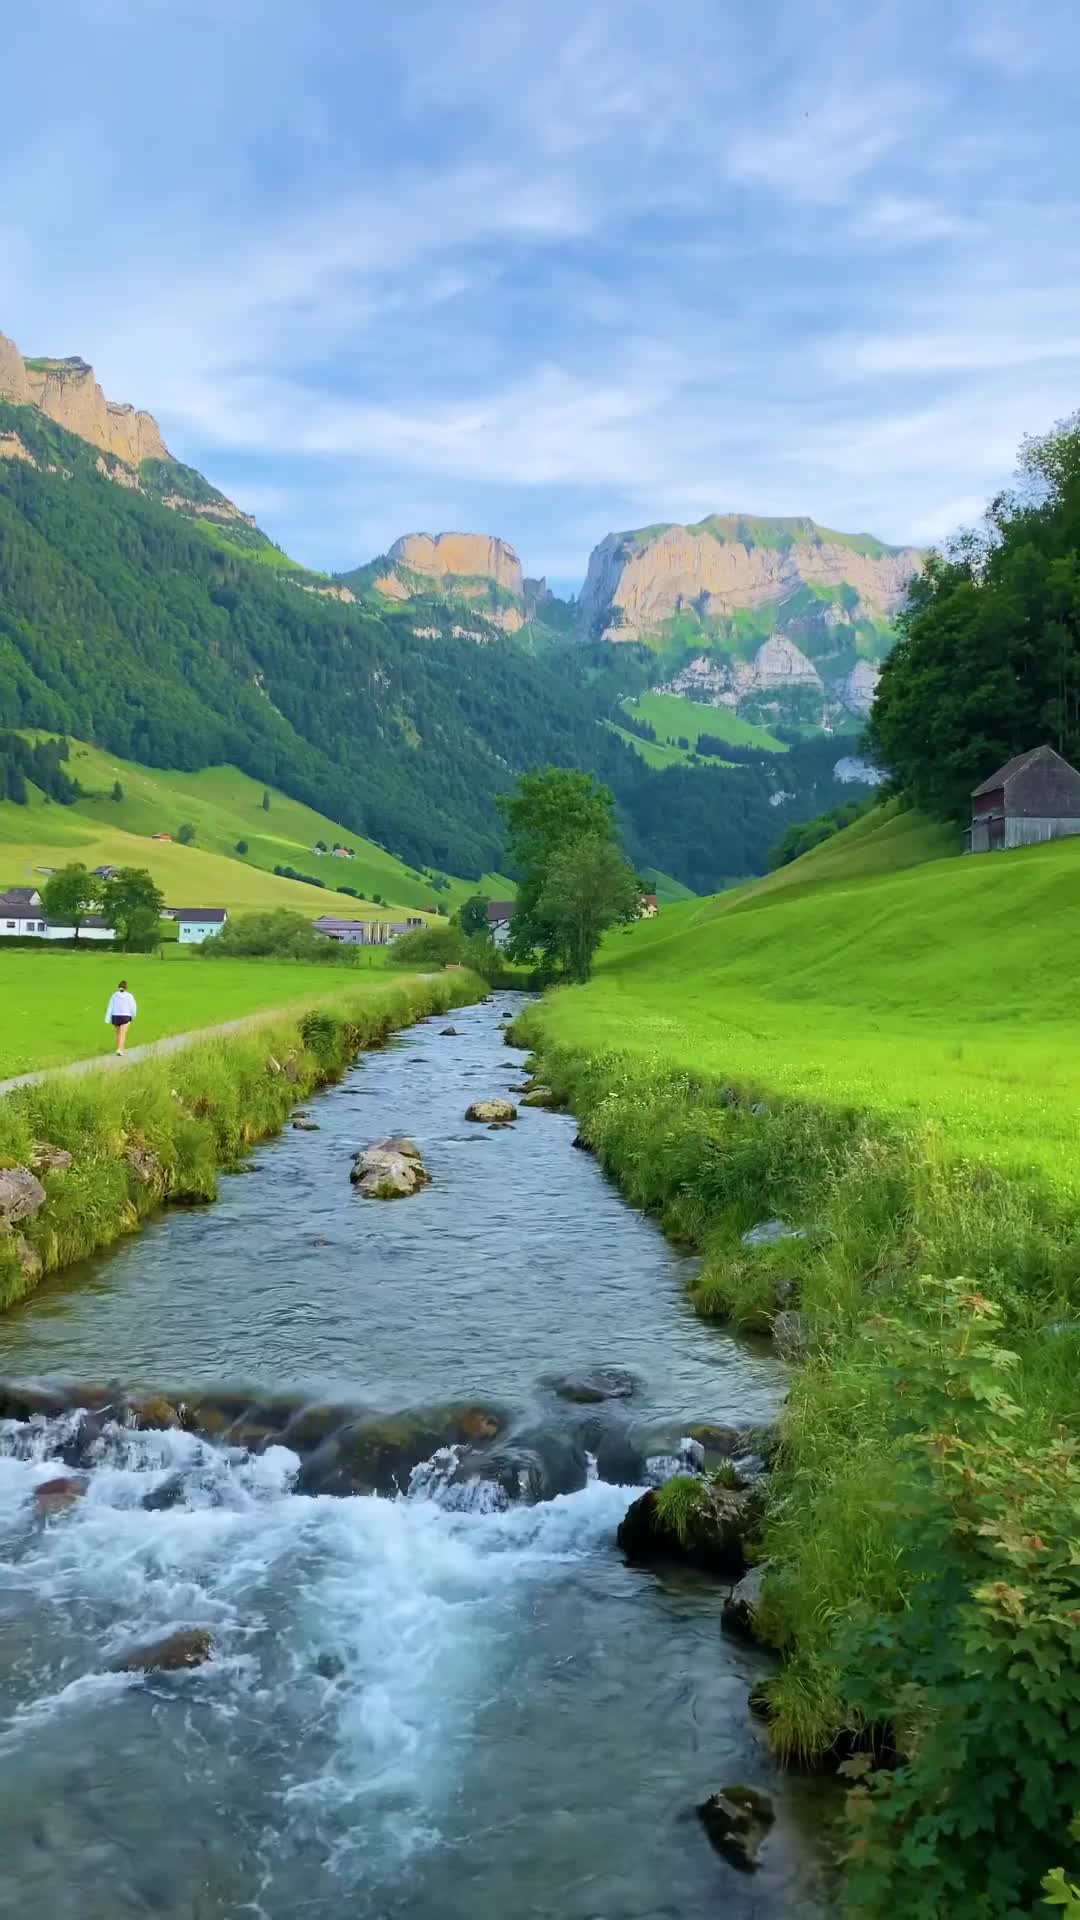 The world 🌎 is not in your books and 🗺 maps - it‘s out there! 
.
📍Wasserauen, Switzerland 🇨🇭
.
✅Save and share this Reel if you want to support me 😊
.
#switzerland #swiss #svizzera #schweiz #travel #travelinspo #summer #hellofrom #landscape #earthpix #earthfocus #hike
#beautifuldestinations #wonderful_swiss #landscape #instatravel #voyaged #adventure #adventure #natur #nature #mountain #view #appenzell #wasserauen